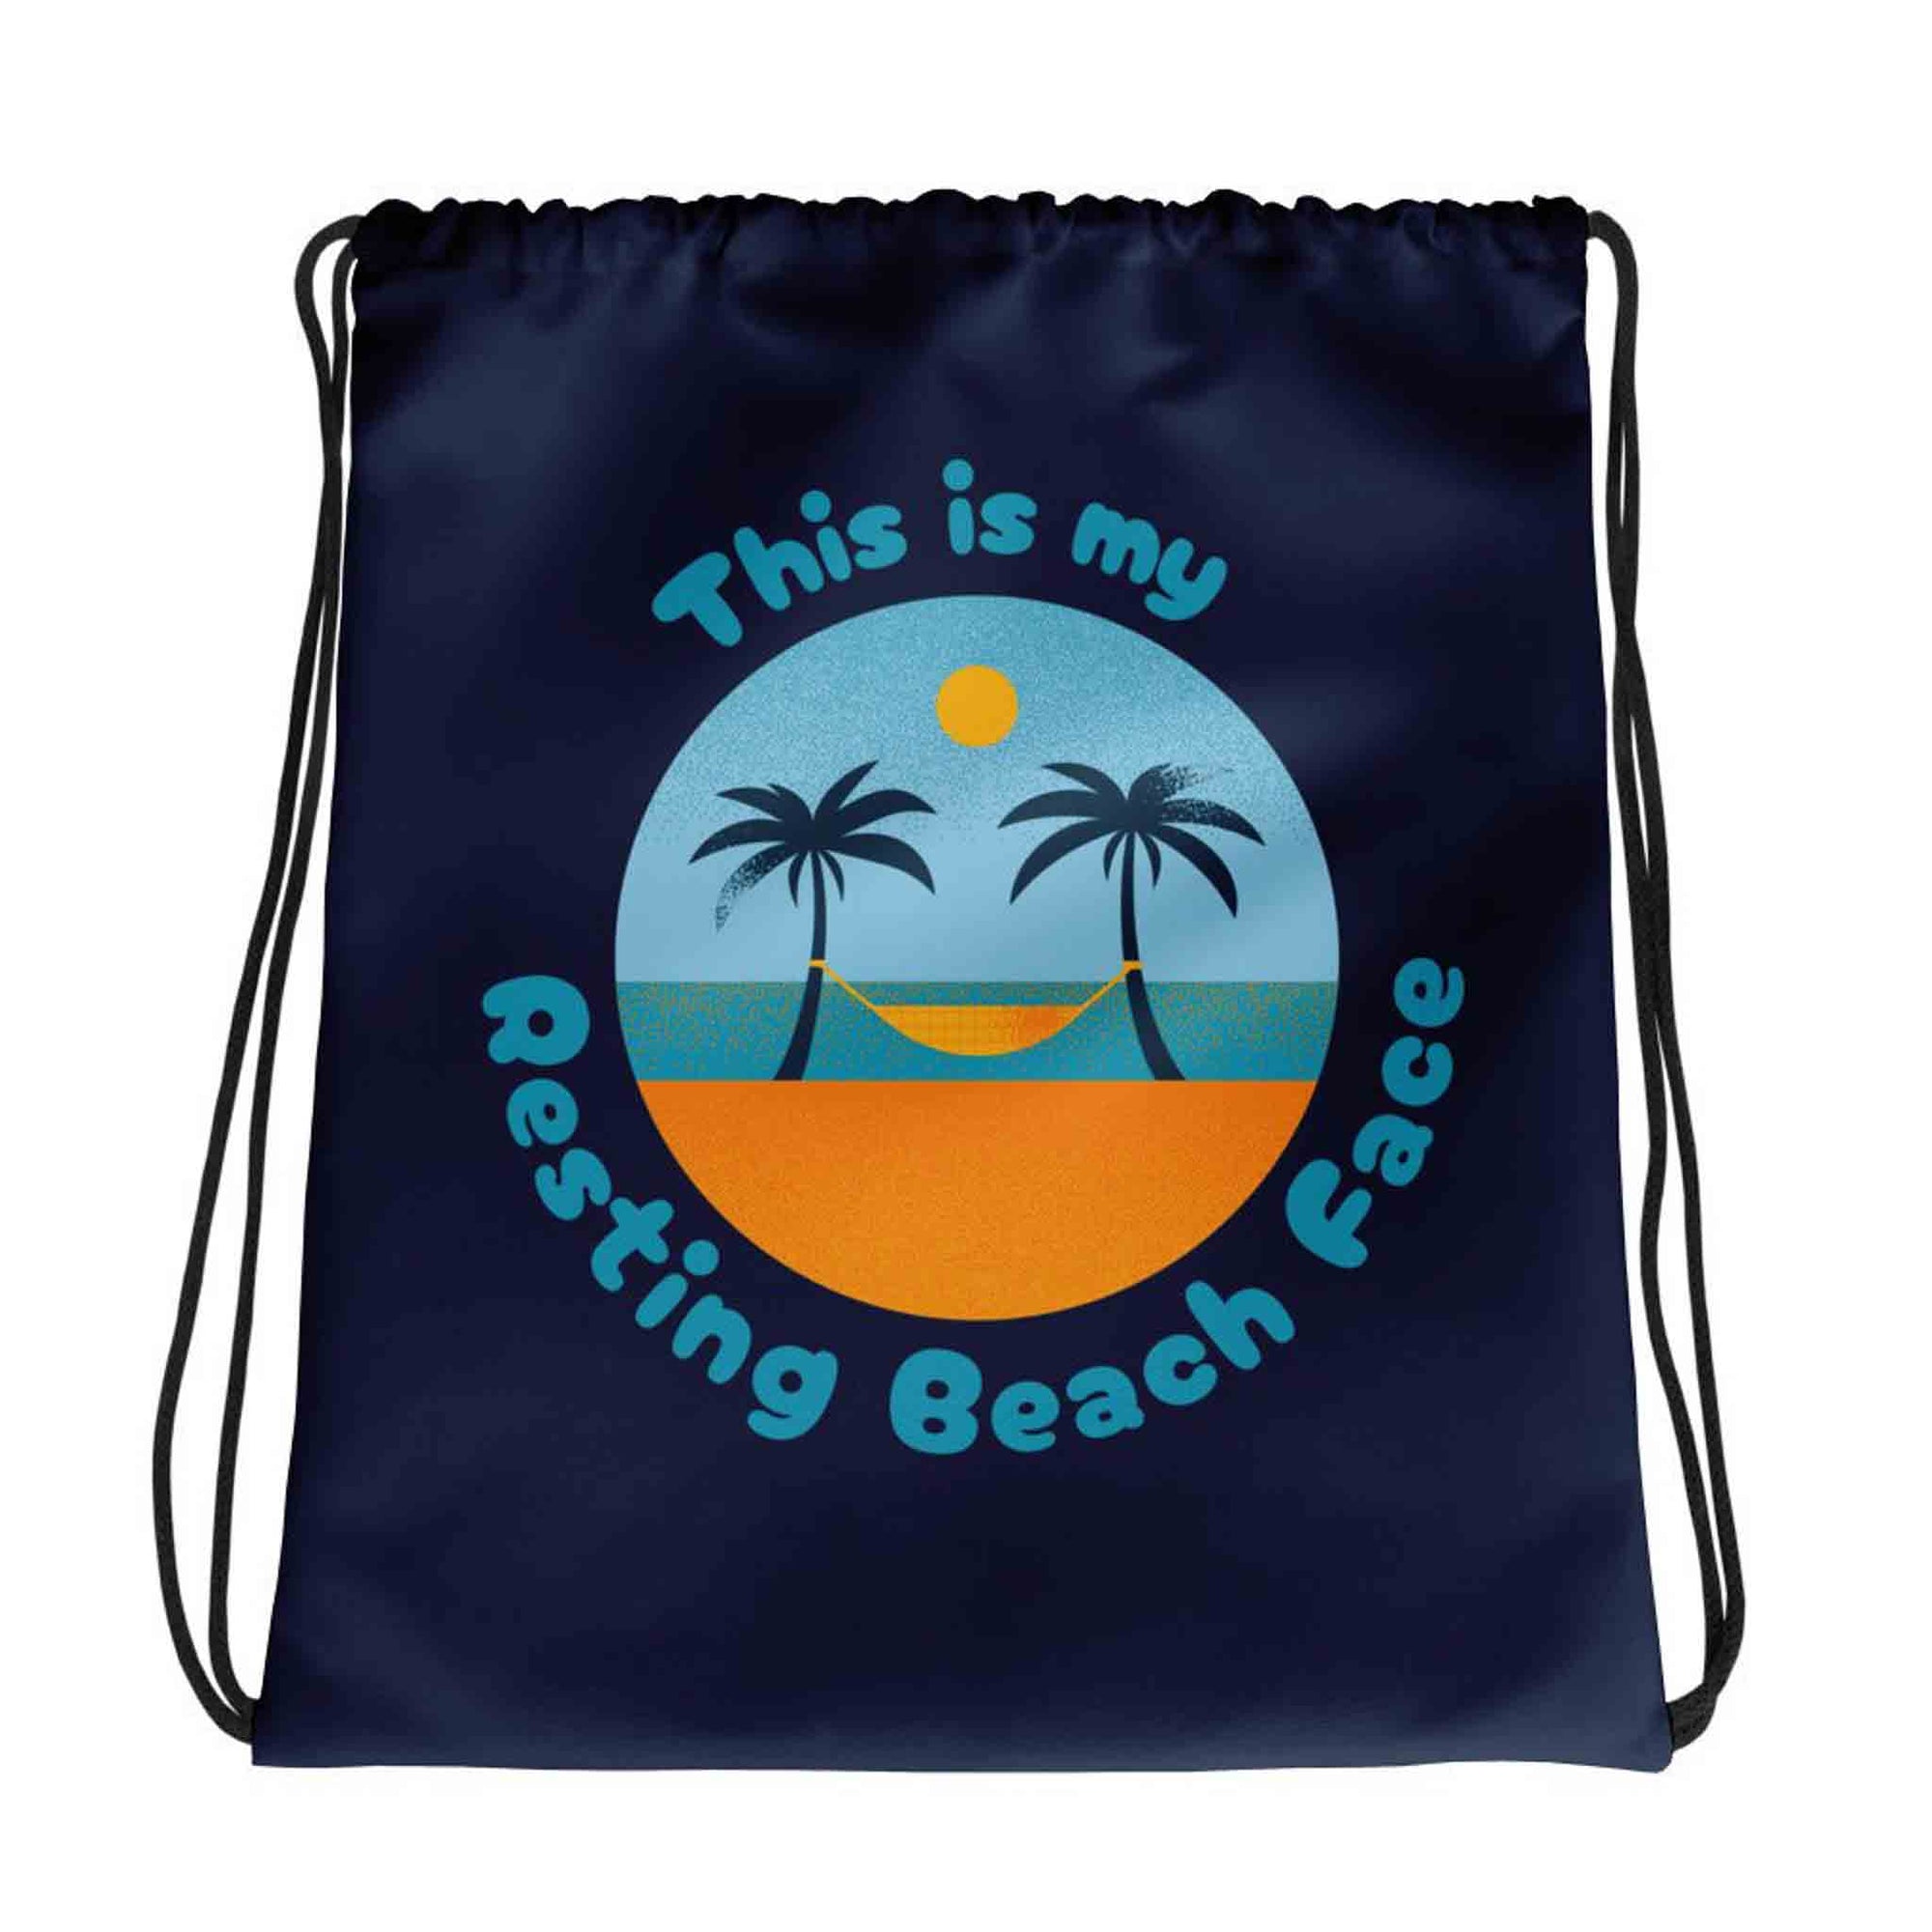 Bags For The Beach